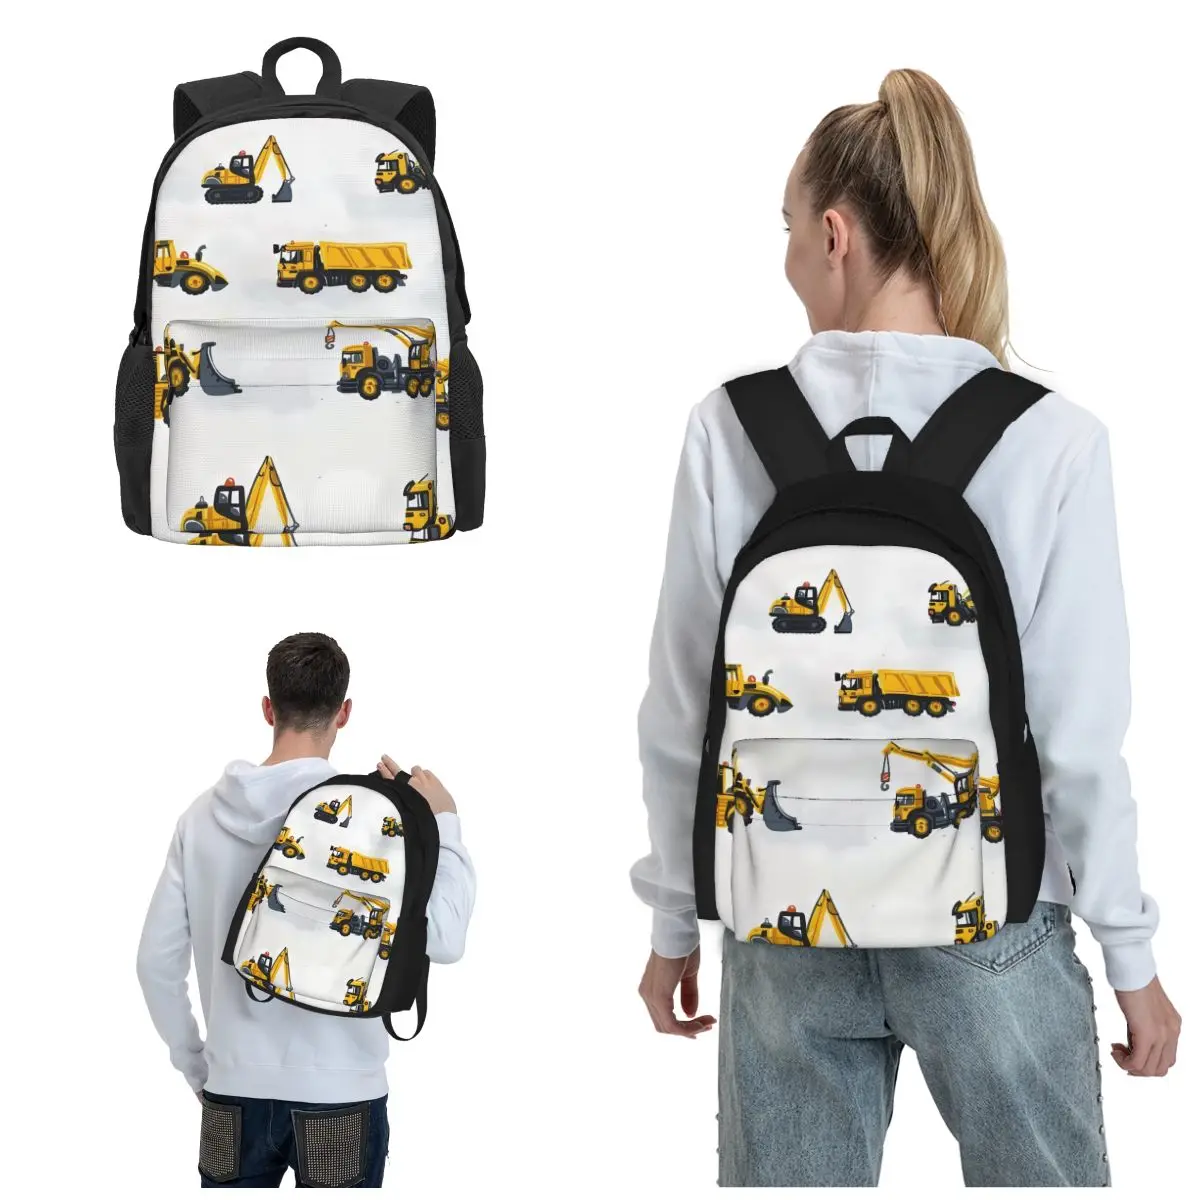 

Truck Backpacks Step Out In Style With Our Fashion-Forward And Functional Backpacks School Backpack For Teens Large Bookbag